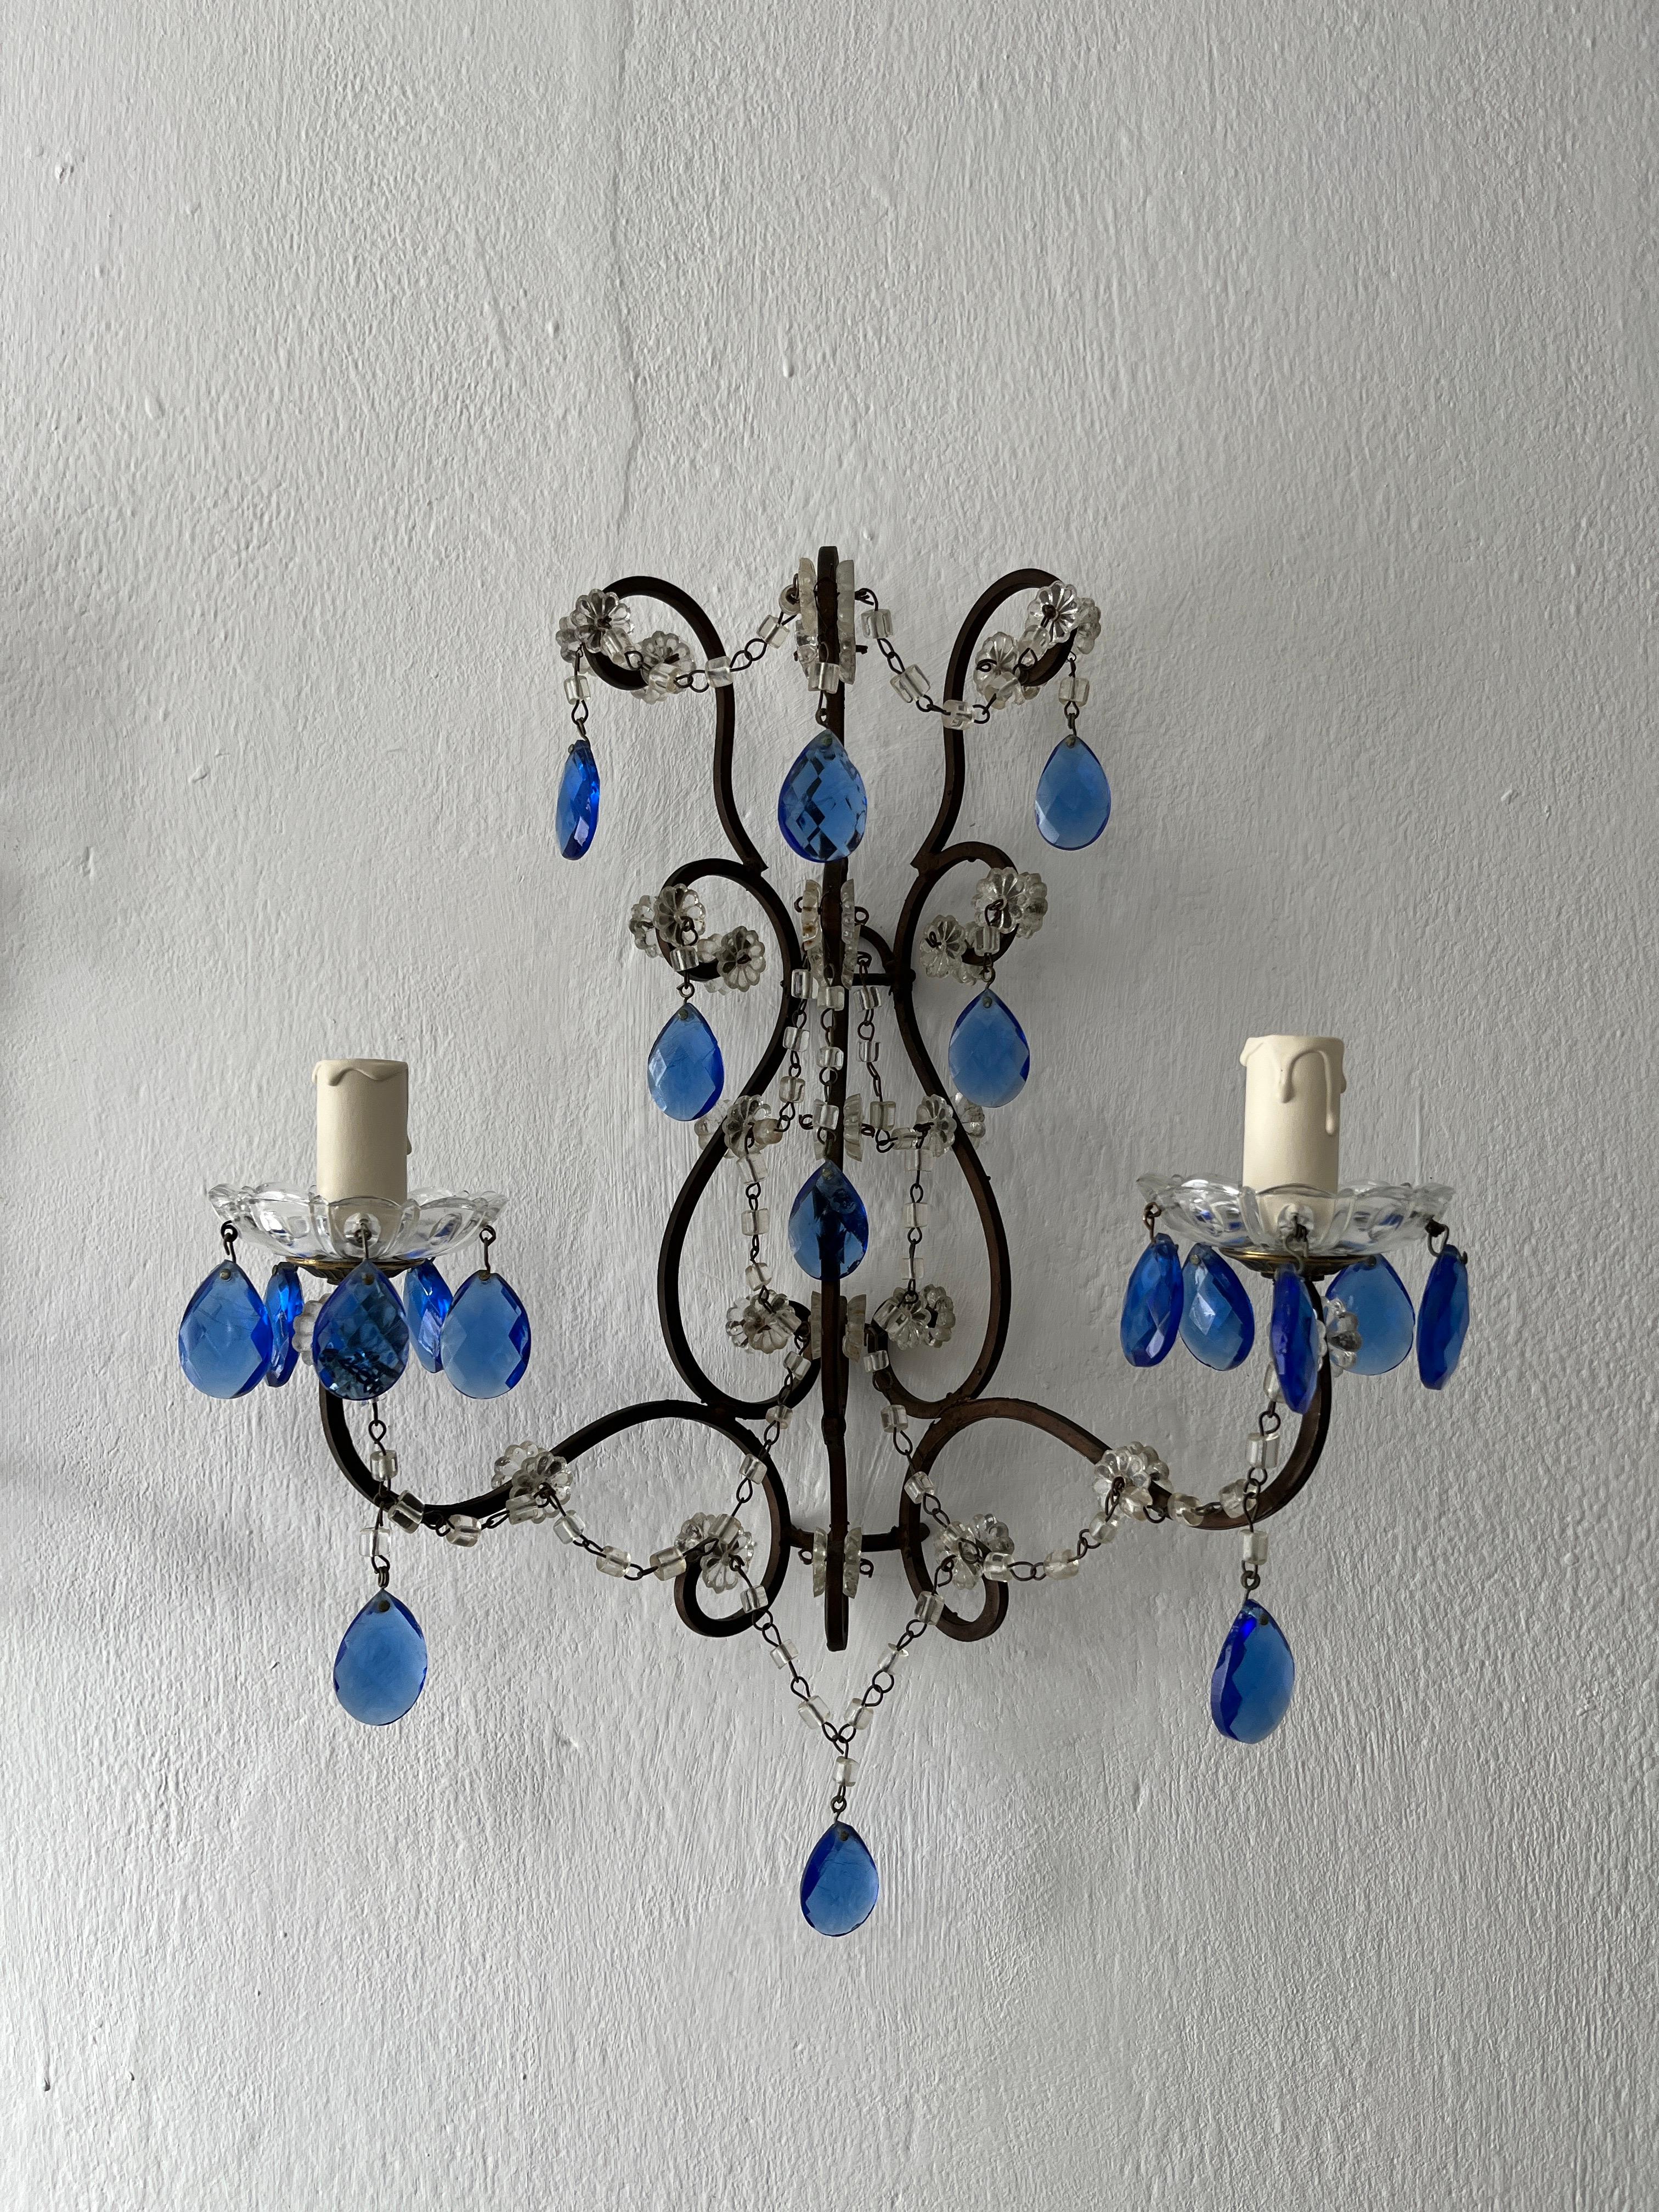 Housing 2 lights each. These will be rewired with certified UL US sockets for the USA and appropriate sockets for the rest of the world. Crystal bobeches dripping with cobalt blue prisms.  Macaroni bead swags throughout.  Re wired and ready to hang.